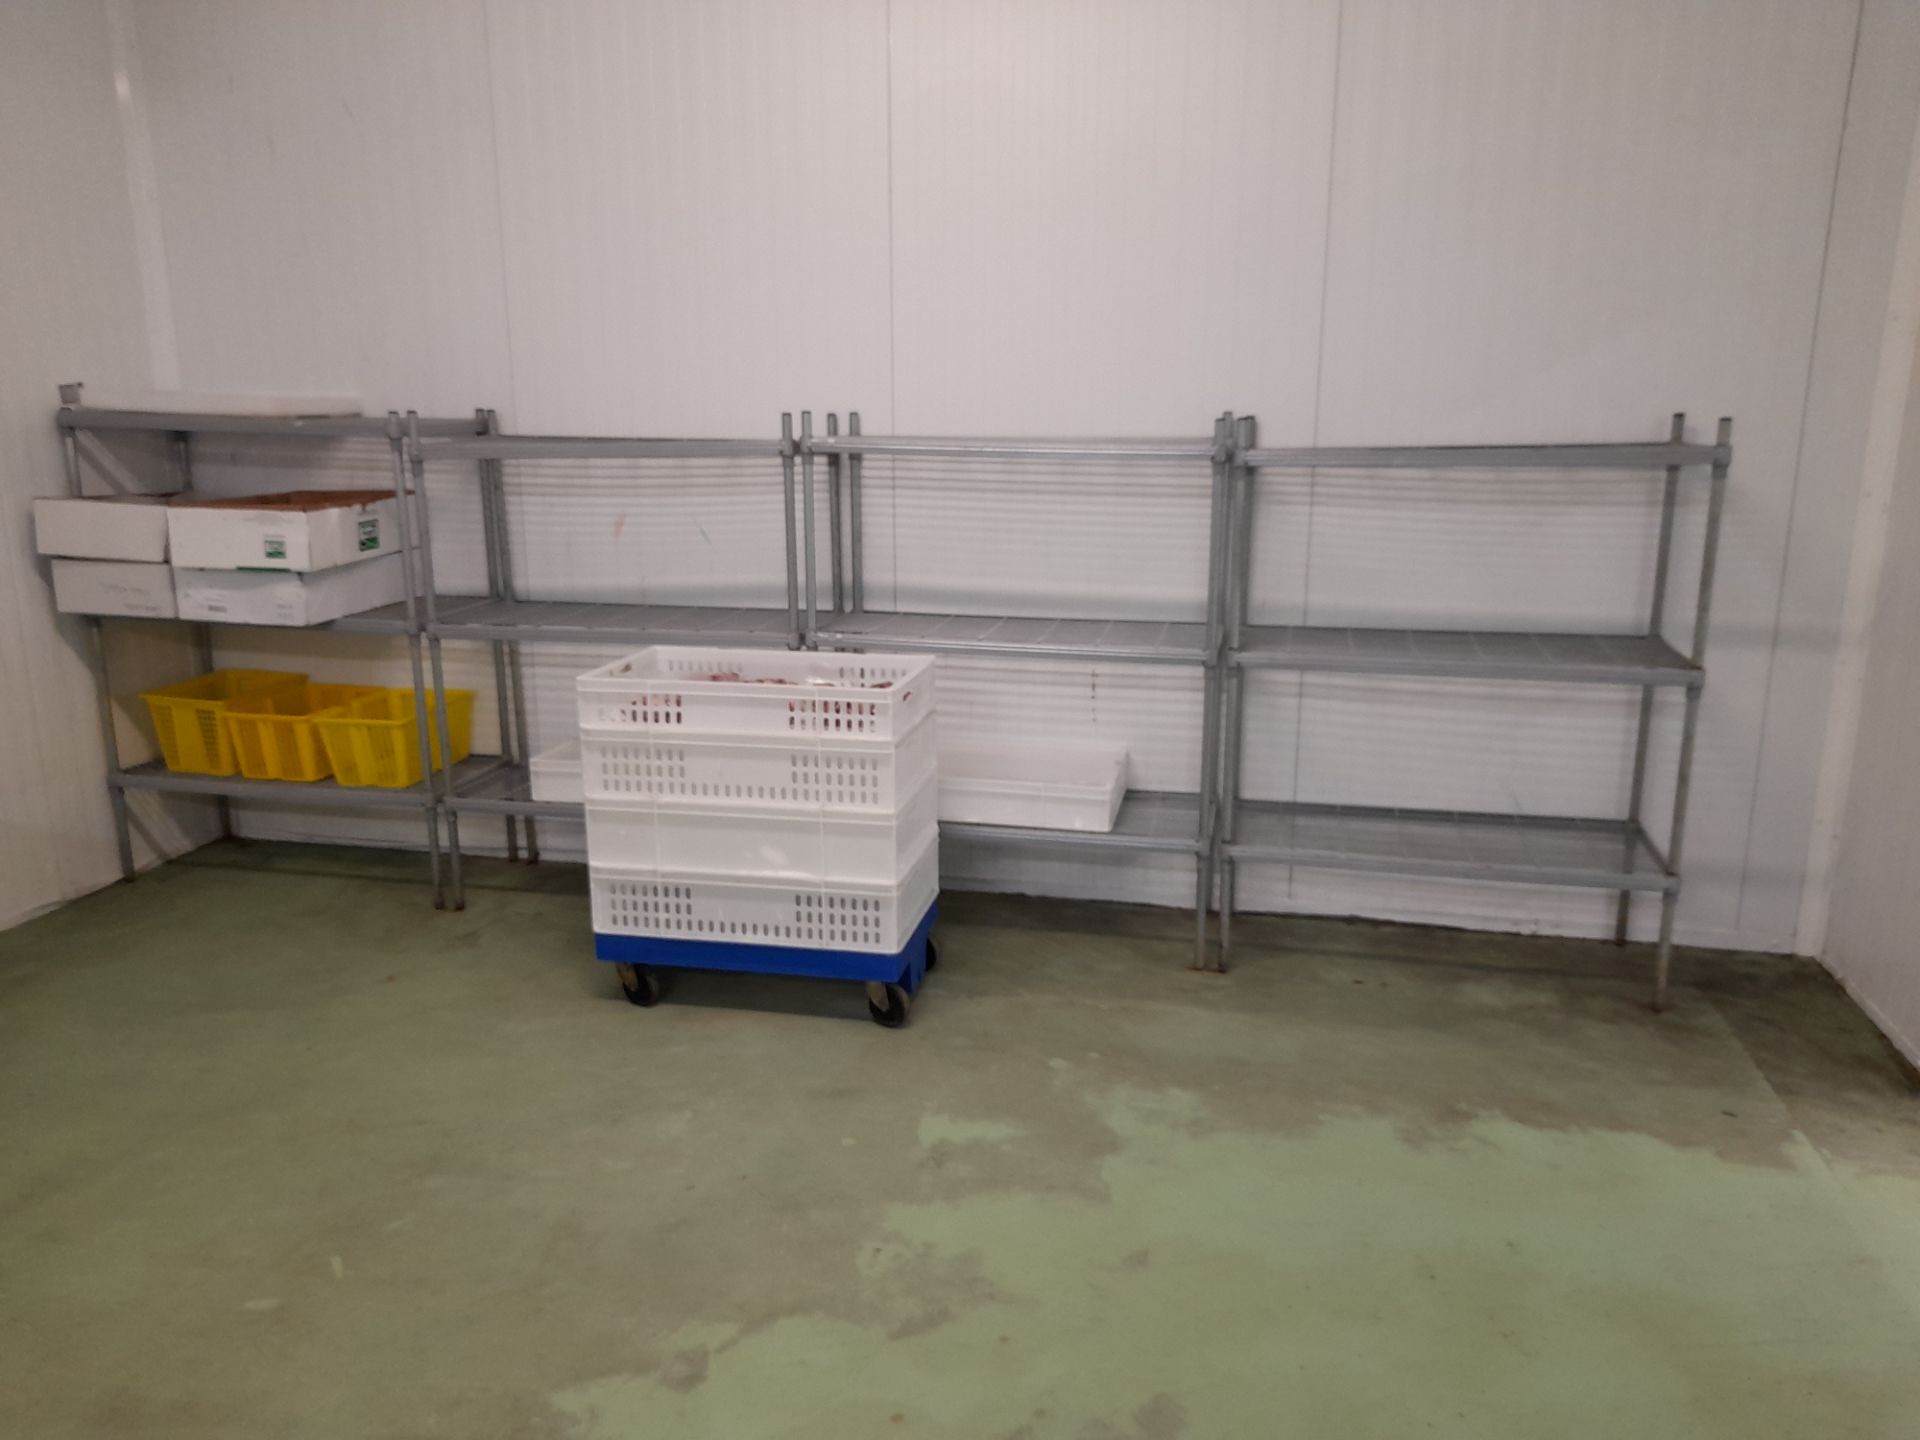 8 x stainless steel mesh racks 1300mm x 1050mm (located chill room 2) (only available for removal